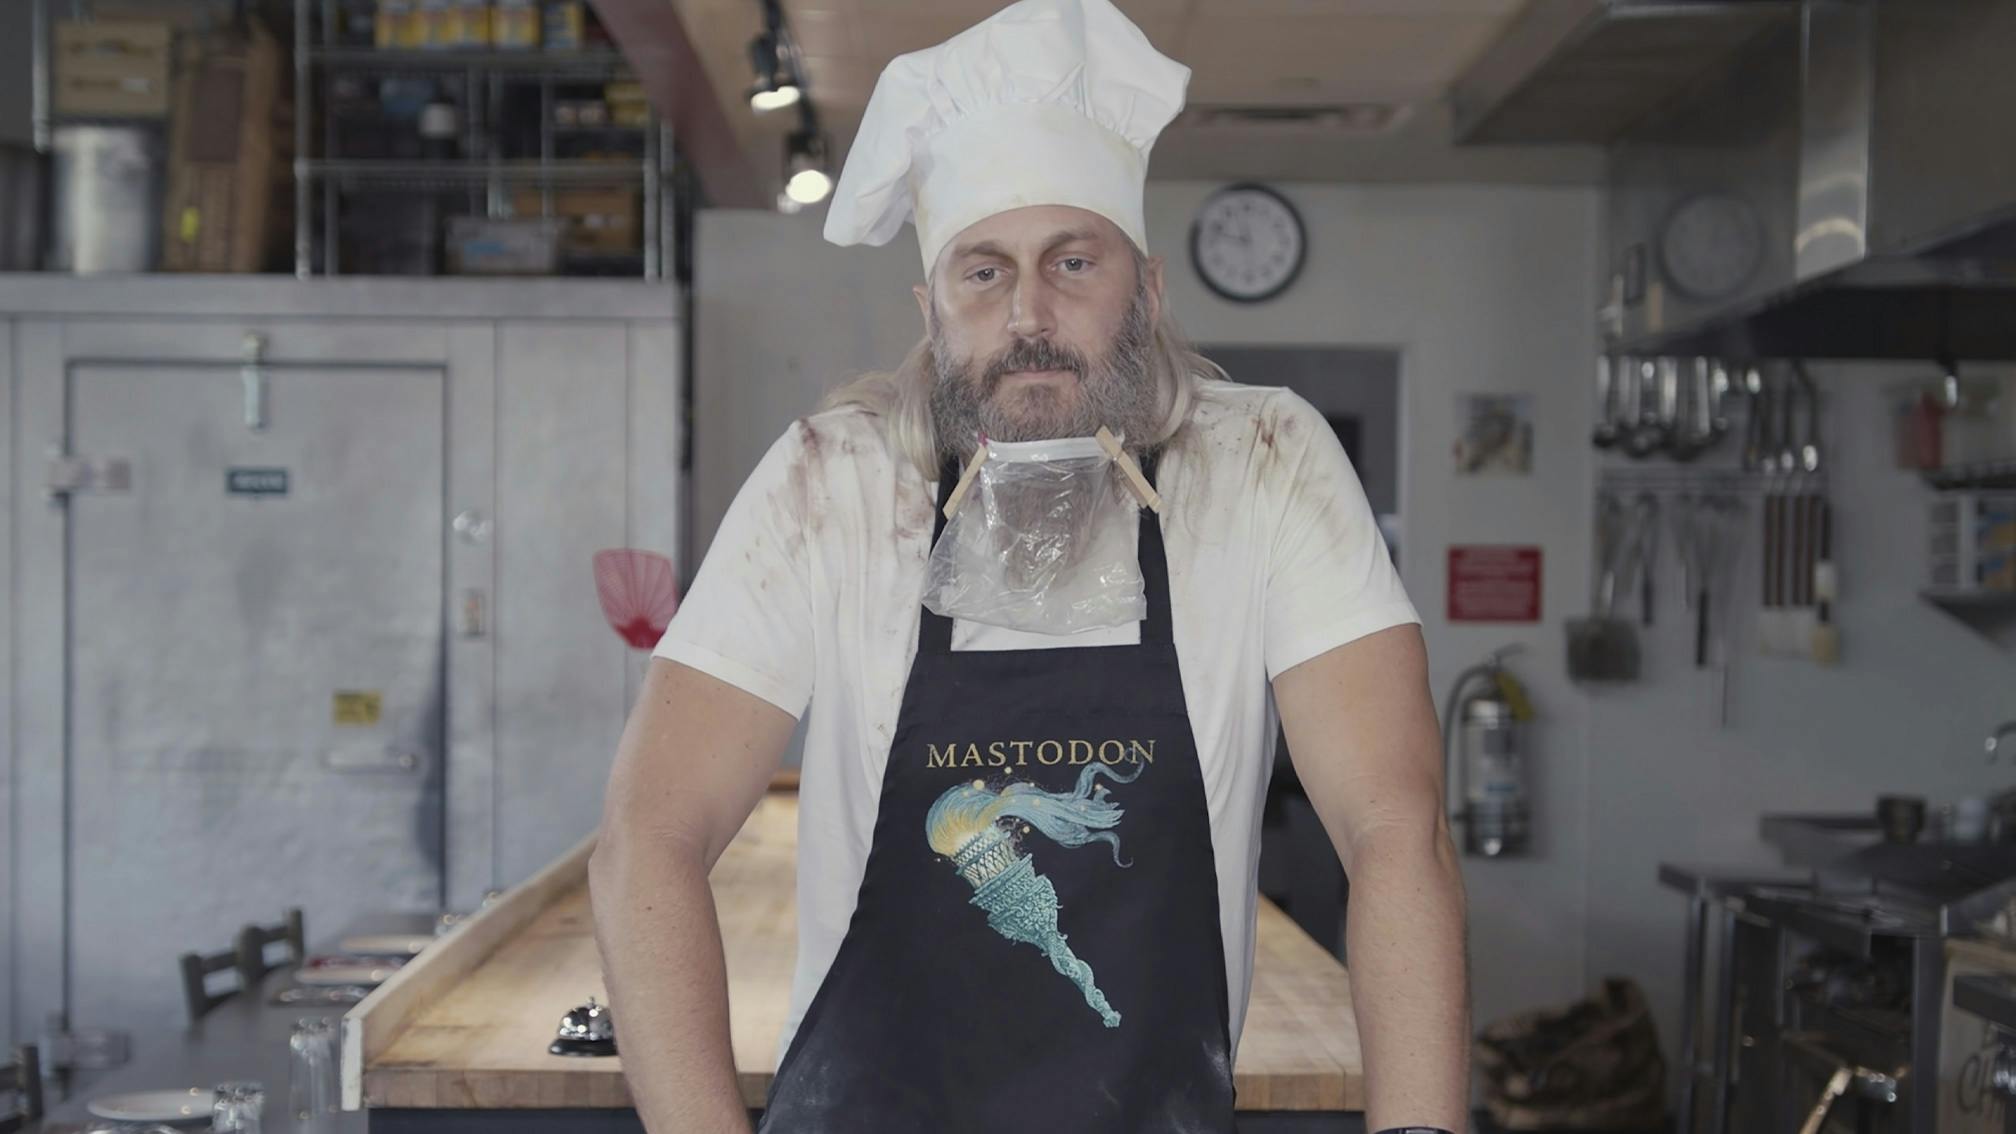 Watch The First Episode Of Mastodon's New Cooking Series